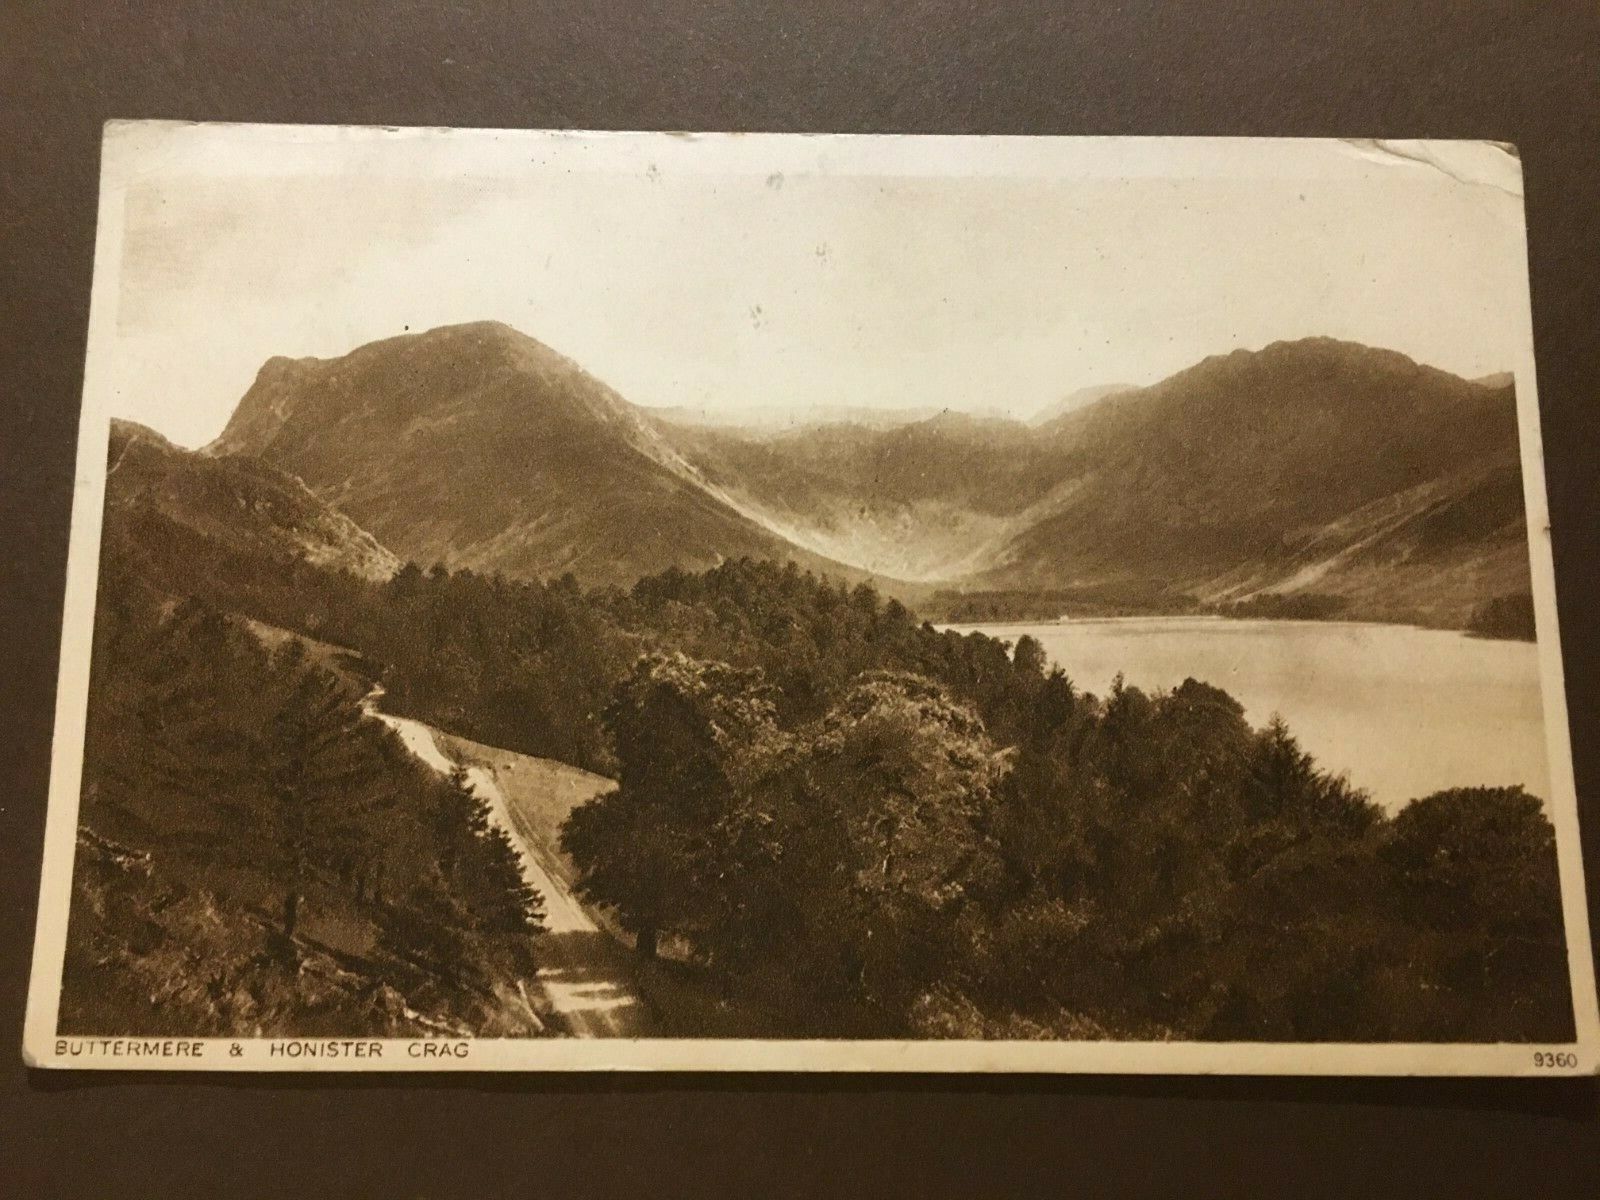 House Clearance - Vintage Service of "Buttermere & Honister Crag", The Lake District. (lot403)